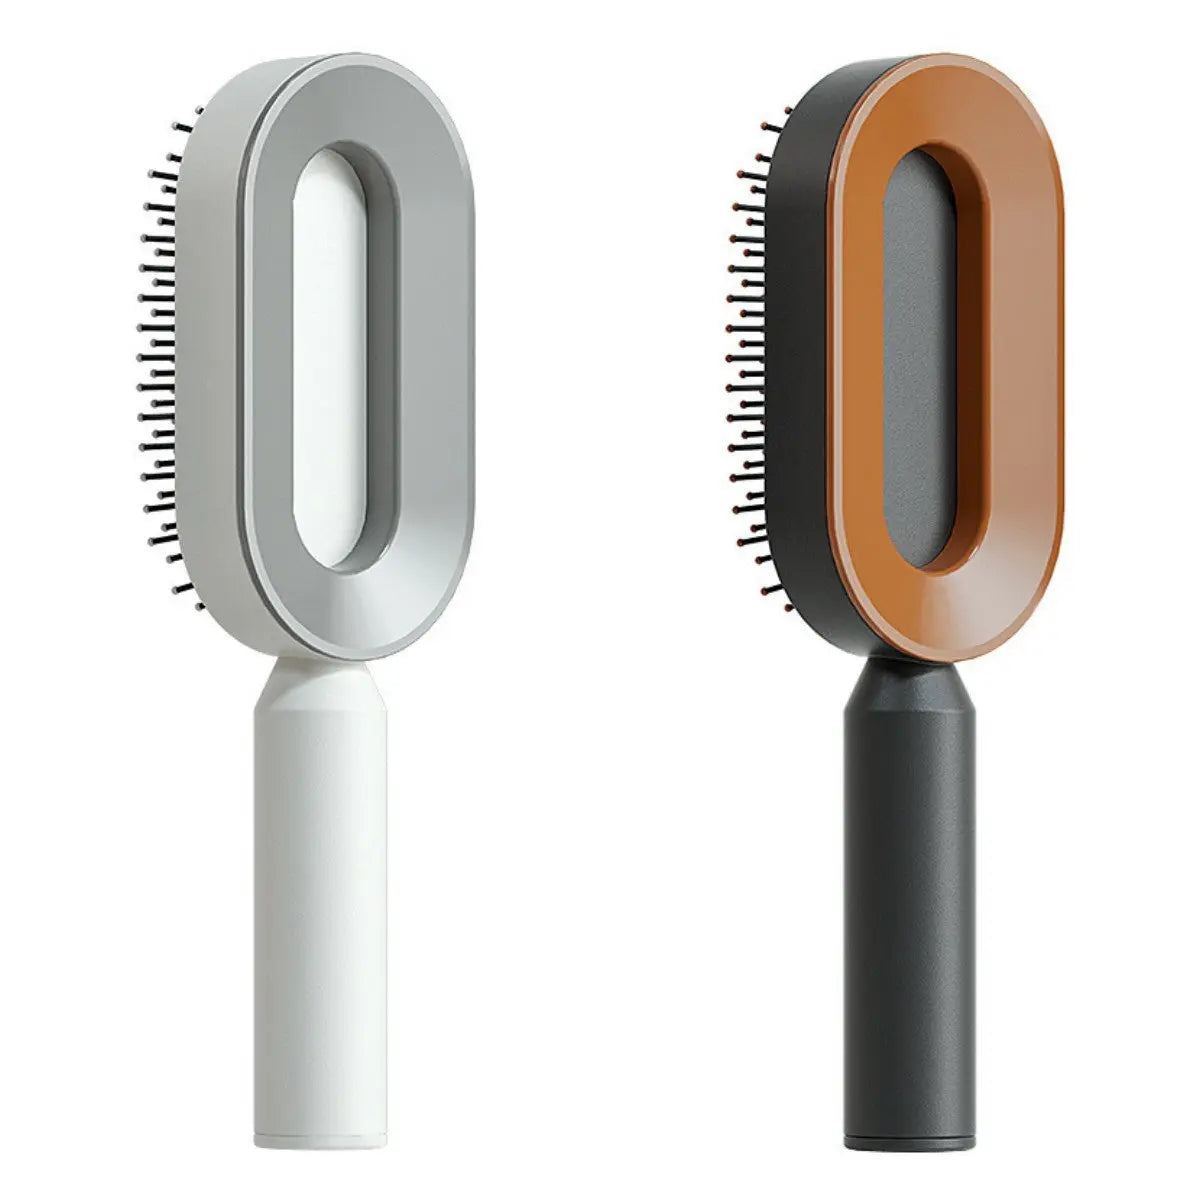 Self Cleaning Hair Brush For Women One-key Cleaning Hair Loss Airbag Massage Scalp Comb Anti-Static Hairbrush - Trending's Arena Beauty Self Cleaning Hair Brush For Women One-key Cleaning Hair Loss Airbag Massage Scalp Comb Anti-Static Hairbrush FACE Set-N